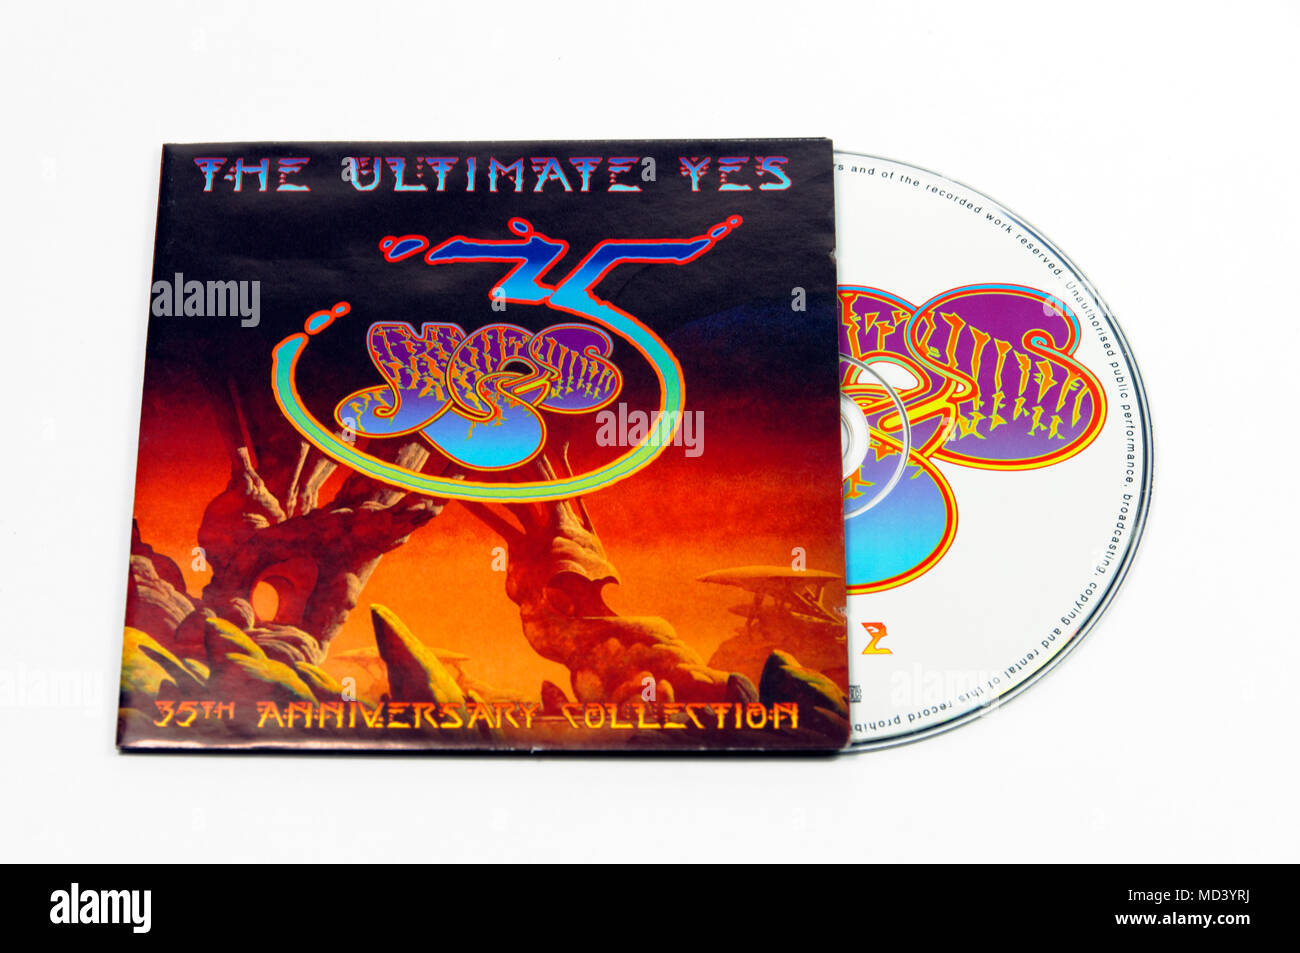 The Ultimate Yes 35 anniversary collection album Stock Photo